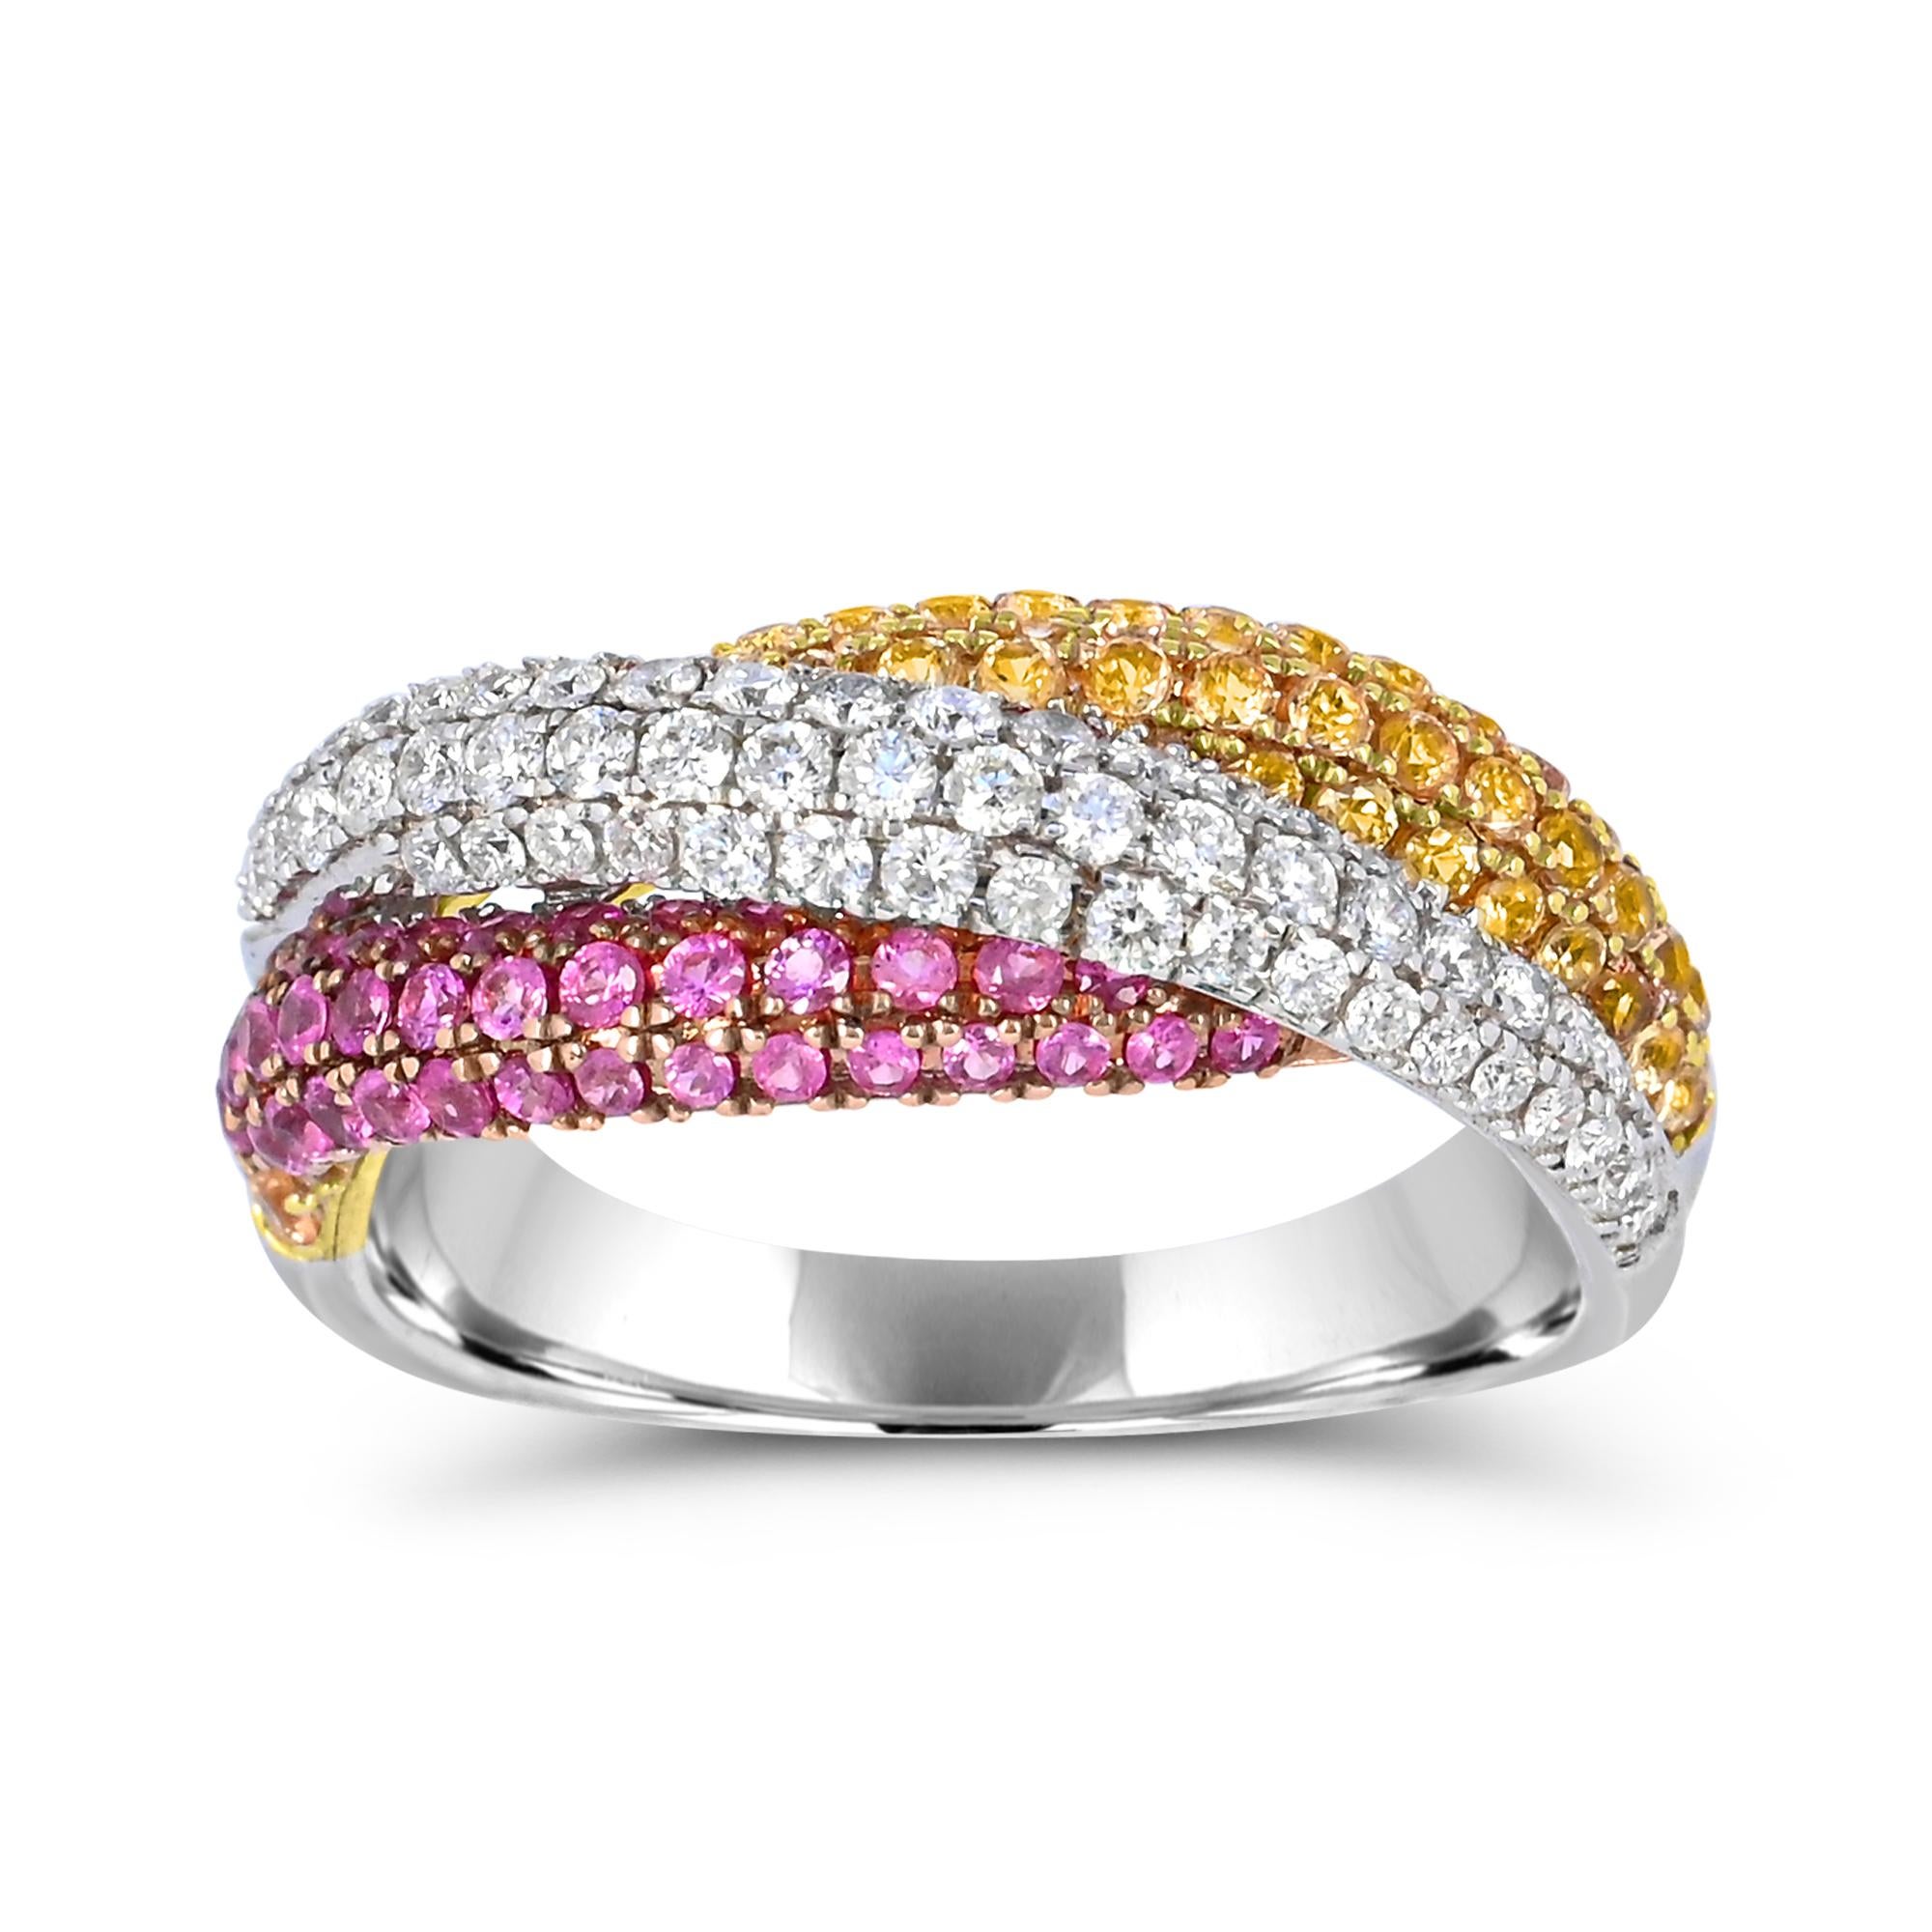 Indulge in the splendor of our Yellow & Pink Sapphire and White Diamond Bypass 14K White Gold Ring. Crafted with meticulous attention to detail, this ring boasts a magnificent combination of sparkling round white diamond, yellow and pink sapphire